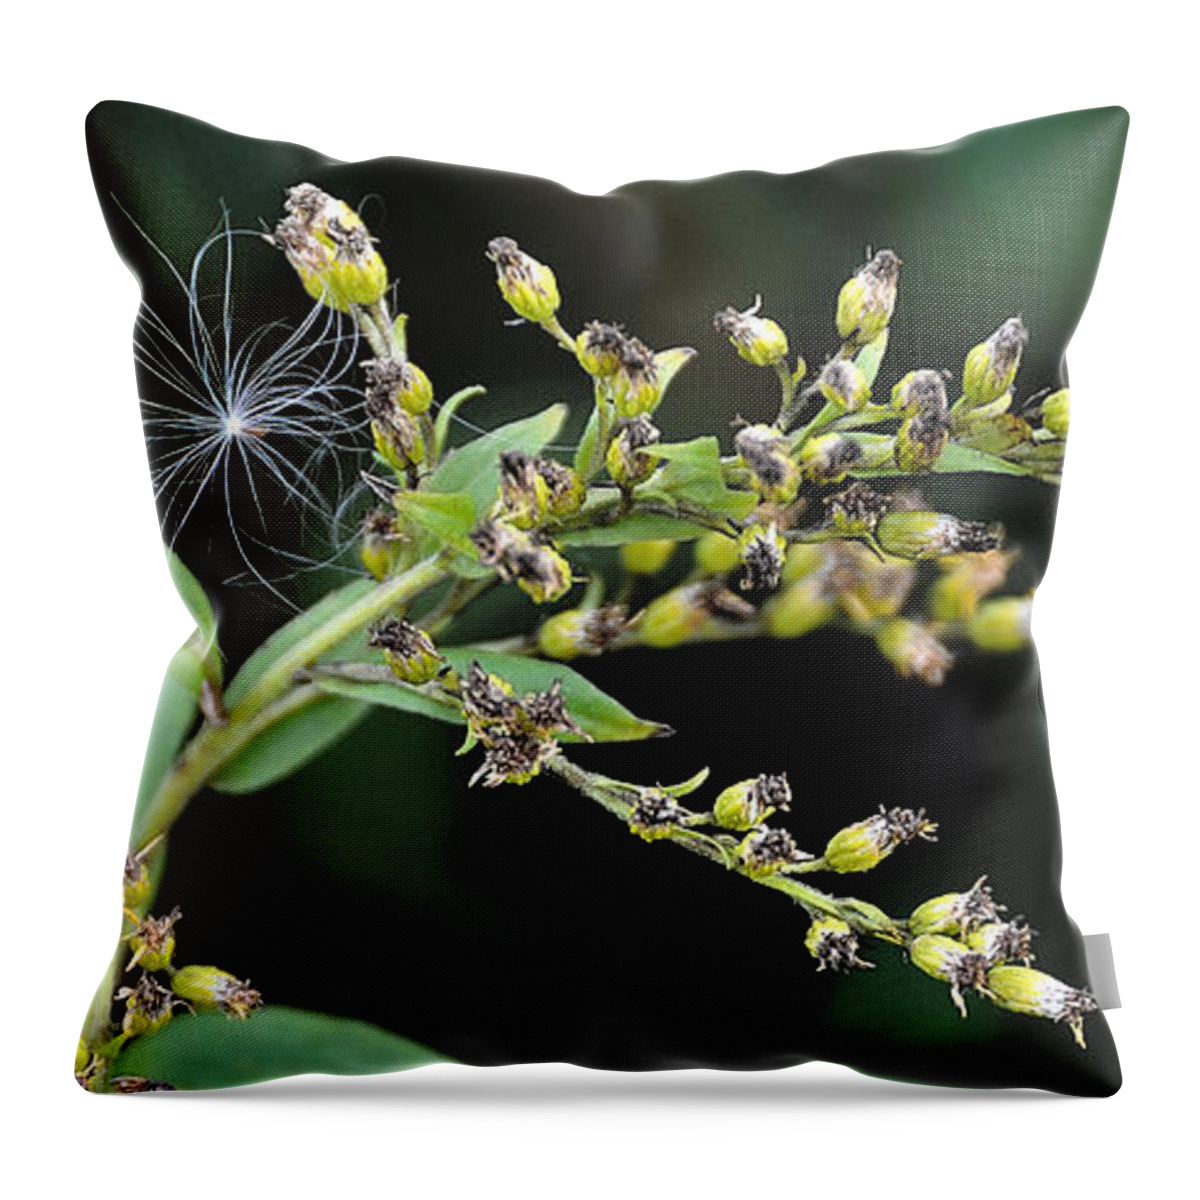 Thistle Throw Pillow featuring the photograph Entrapped by Mark Fuller